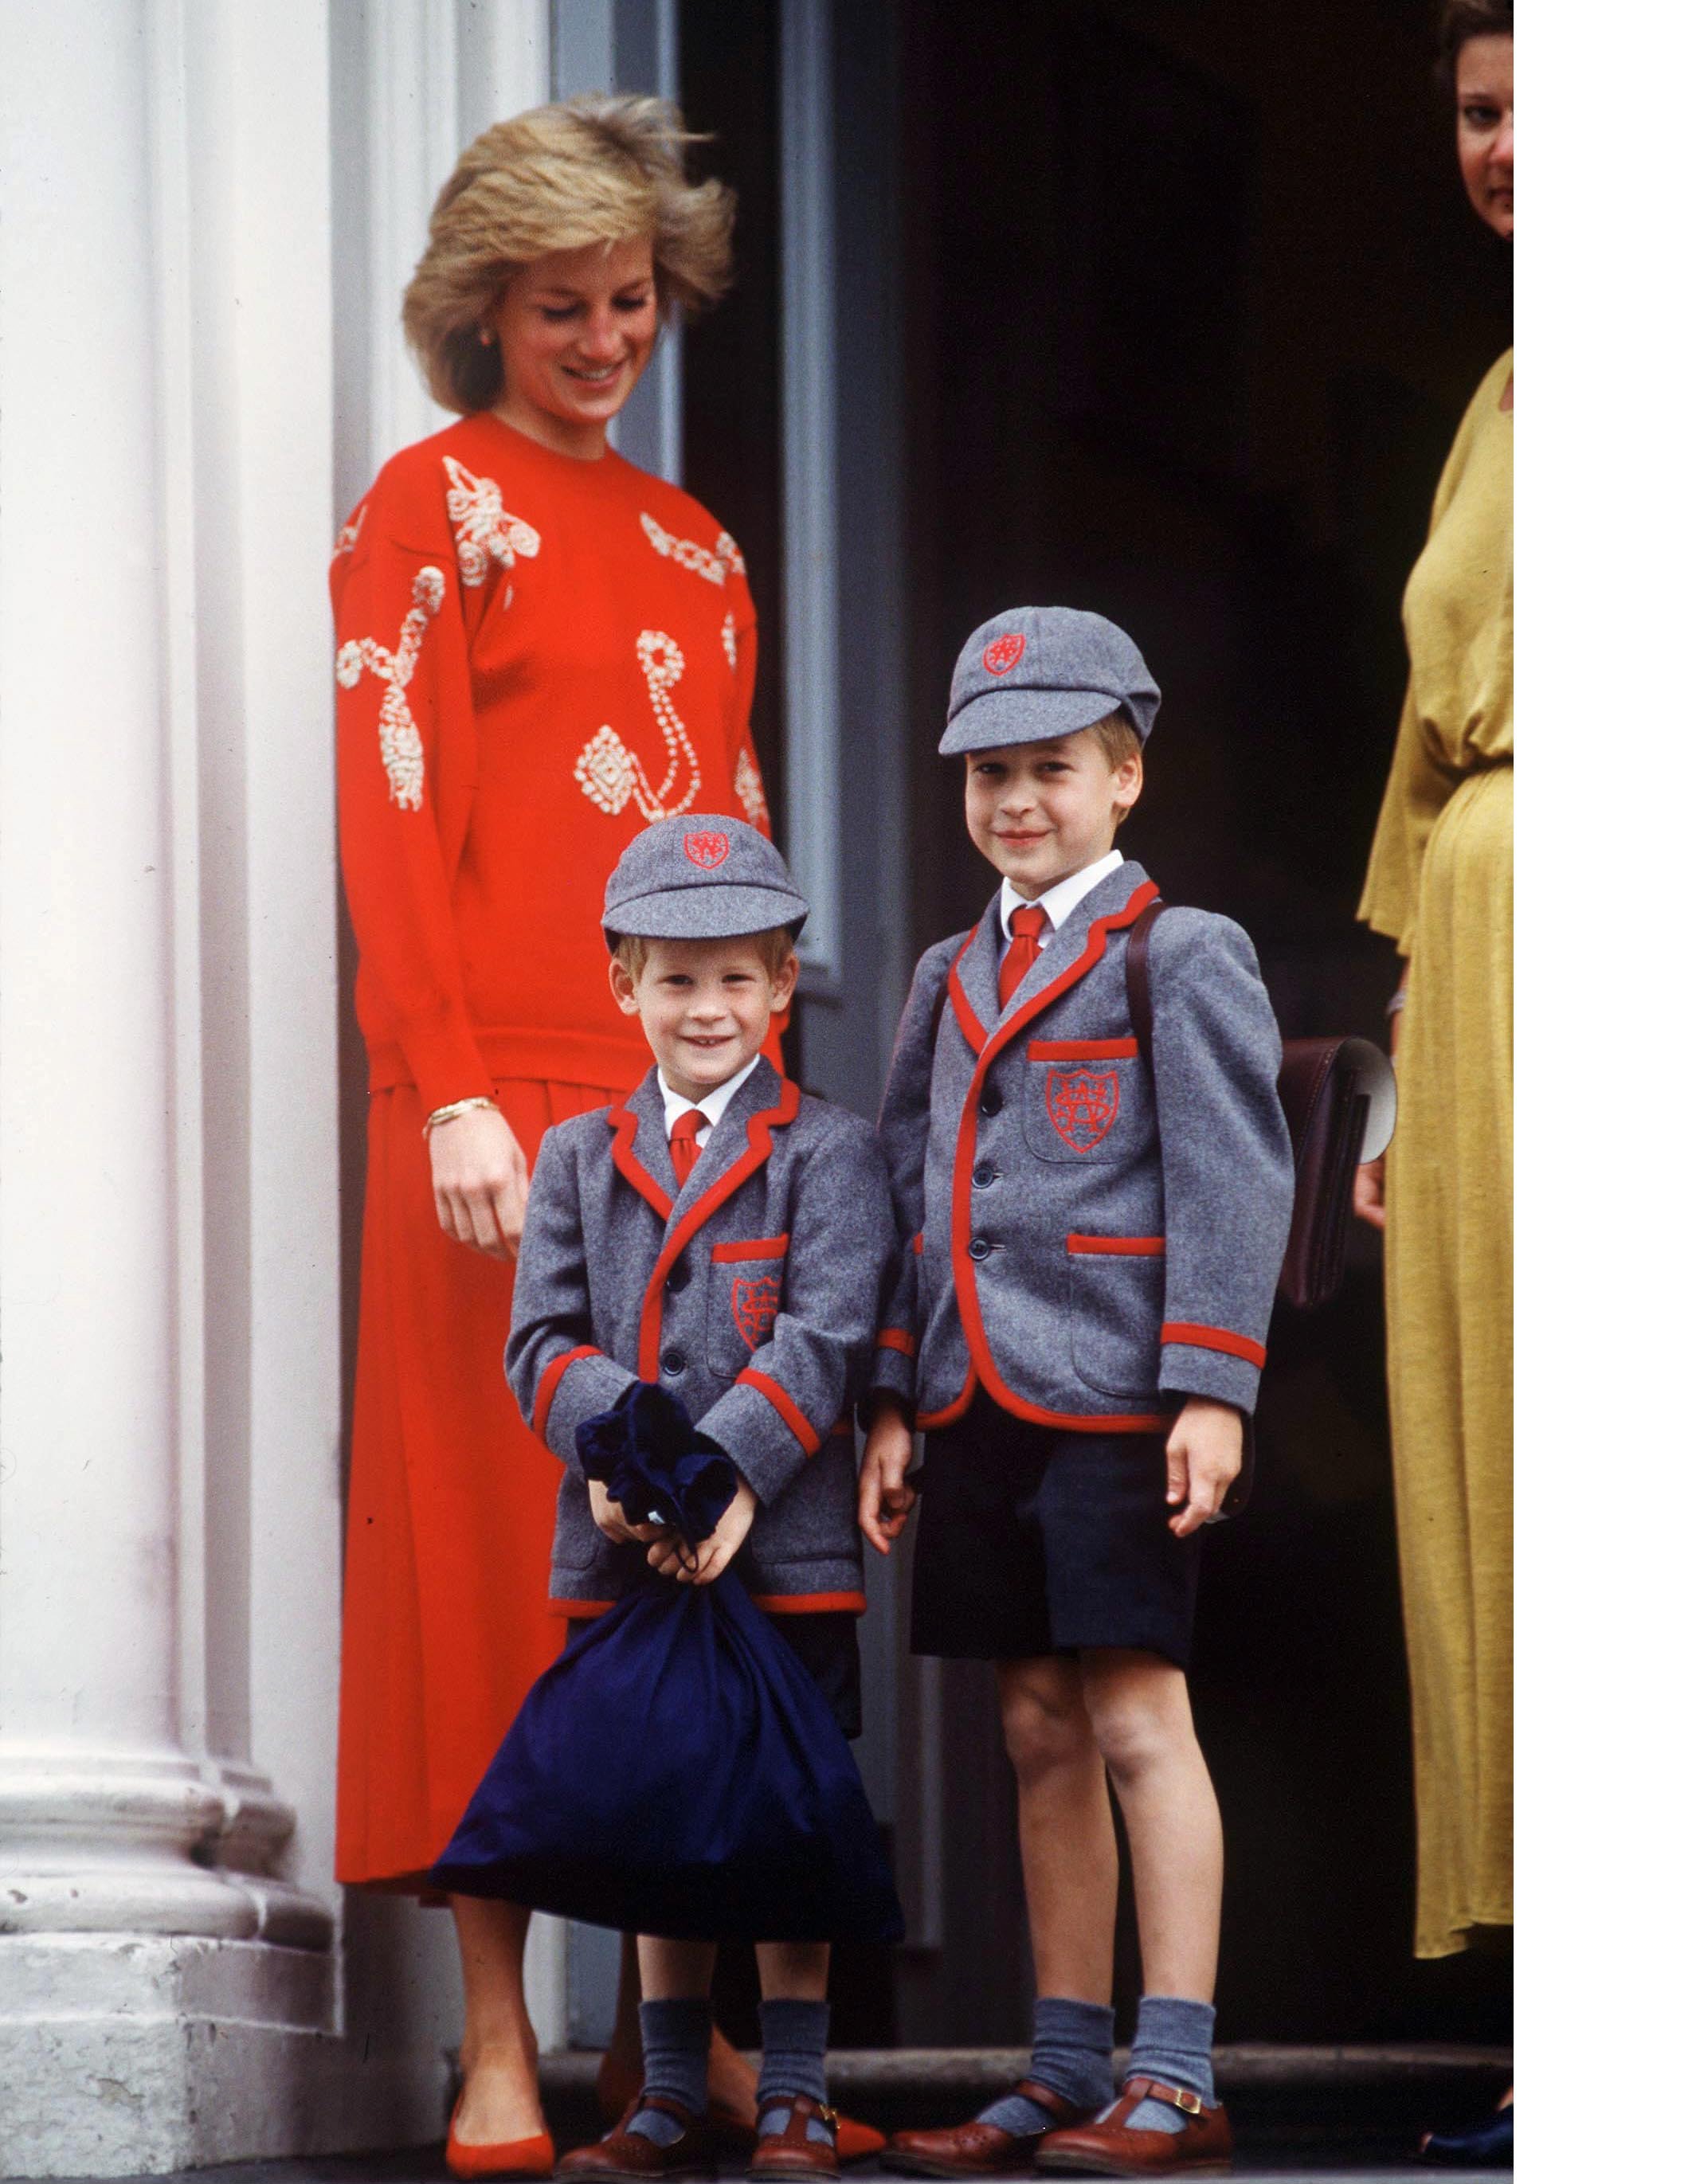 Princess Diana with Prince William and Prince Harry on Harry's first day at Wetherby School |  Source: Getty Images